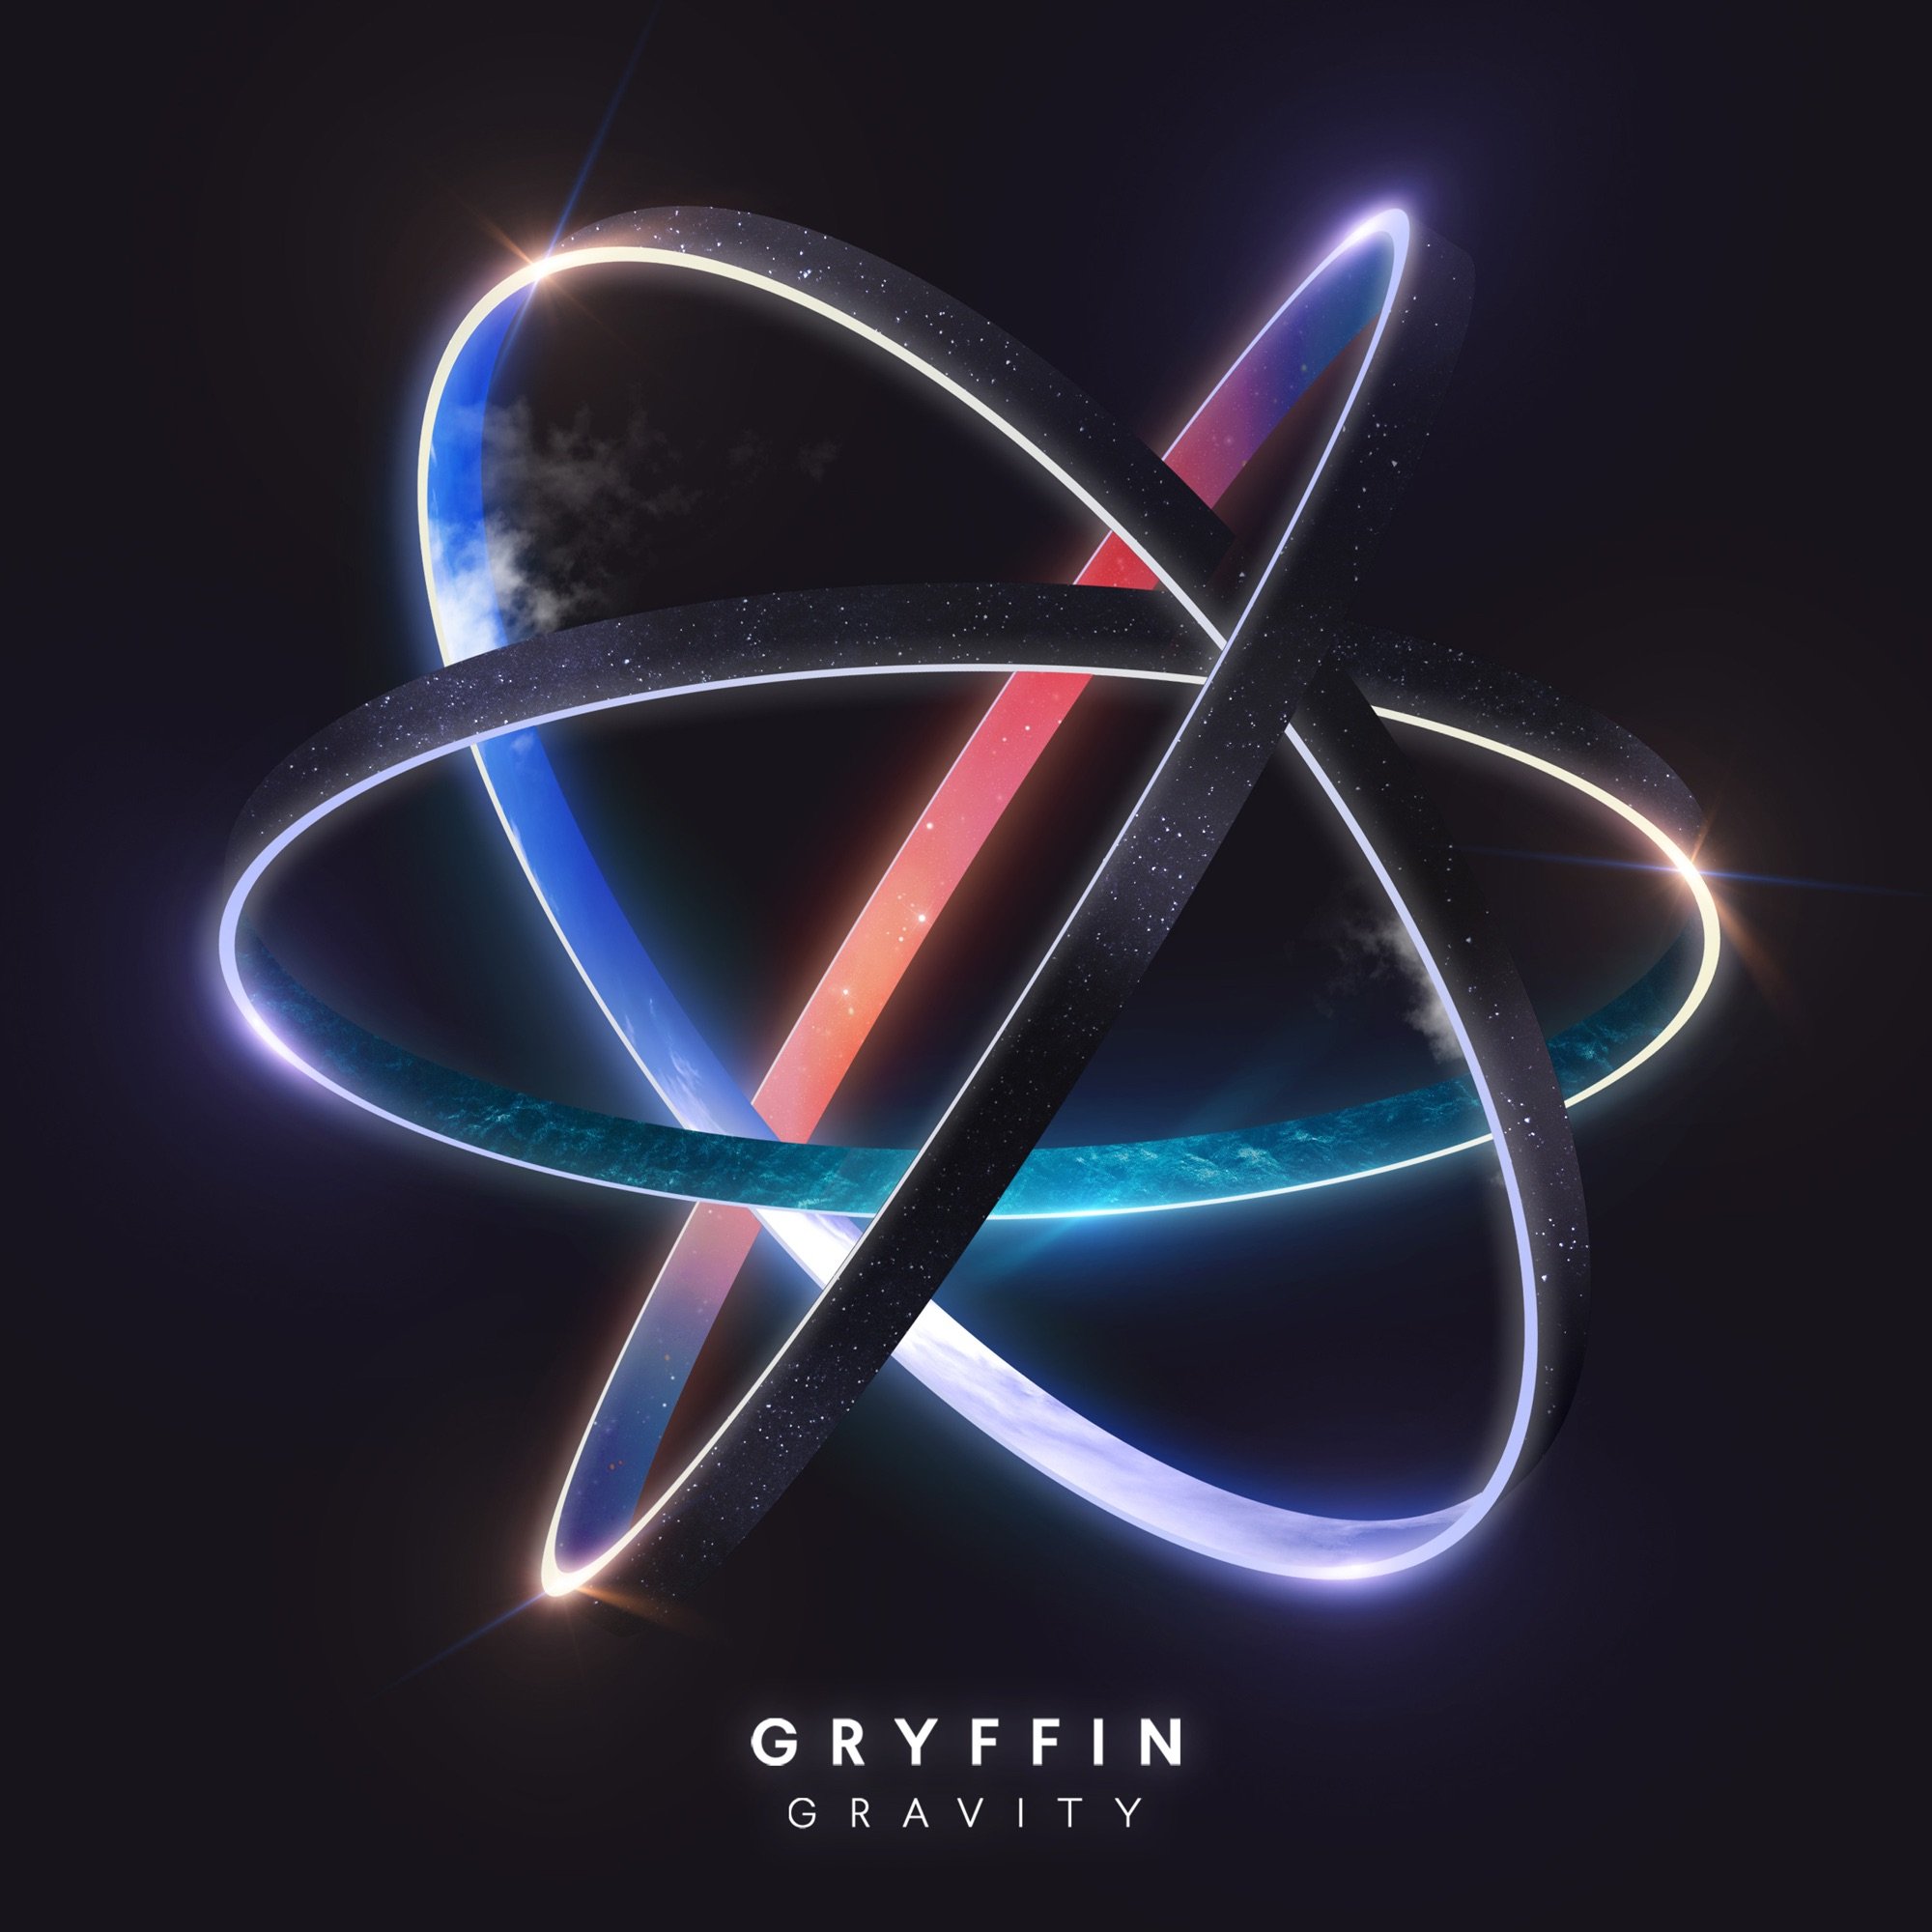 Gryffin-Gravity-DELUXE EDITION-16BIT-WEB-FLAC-2019-TVRf